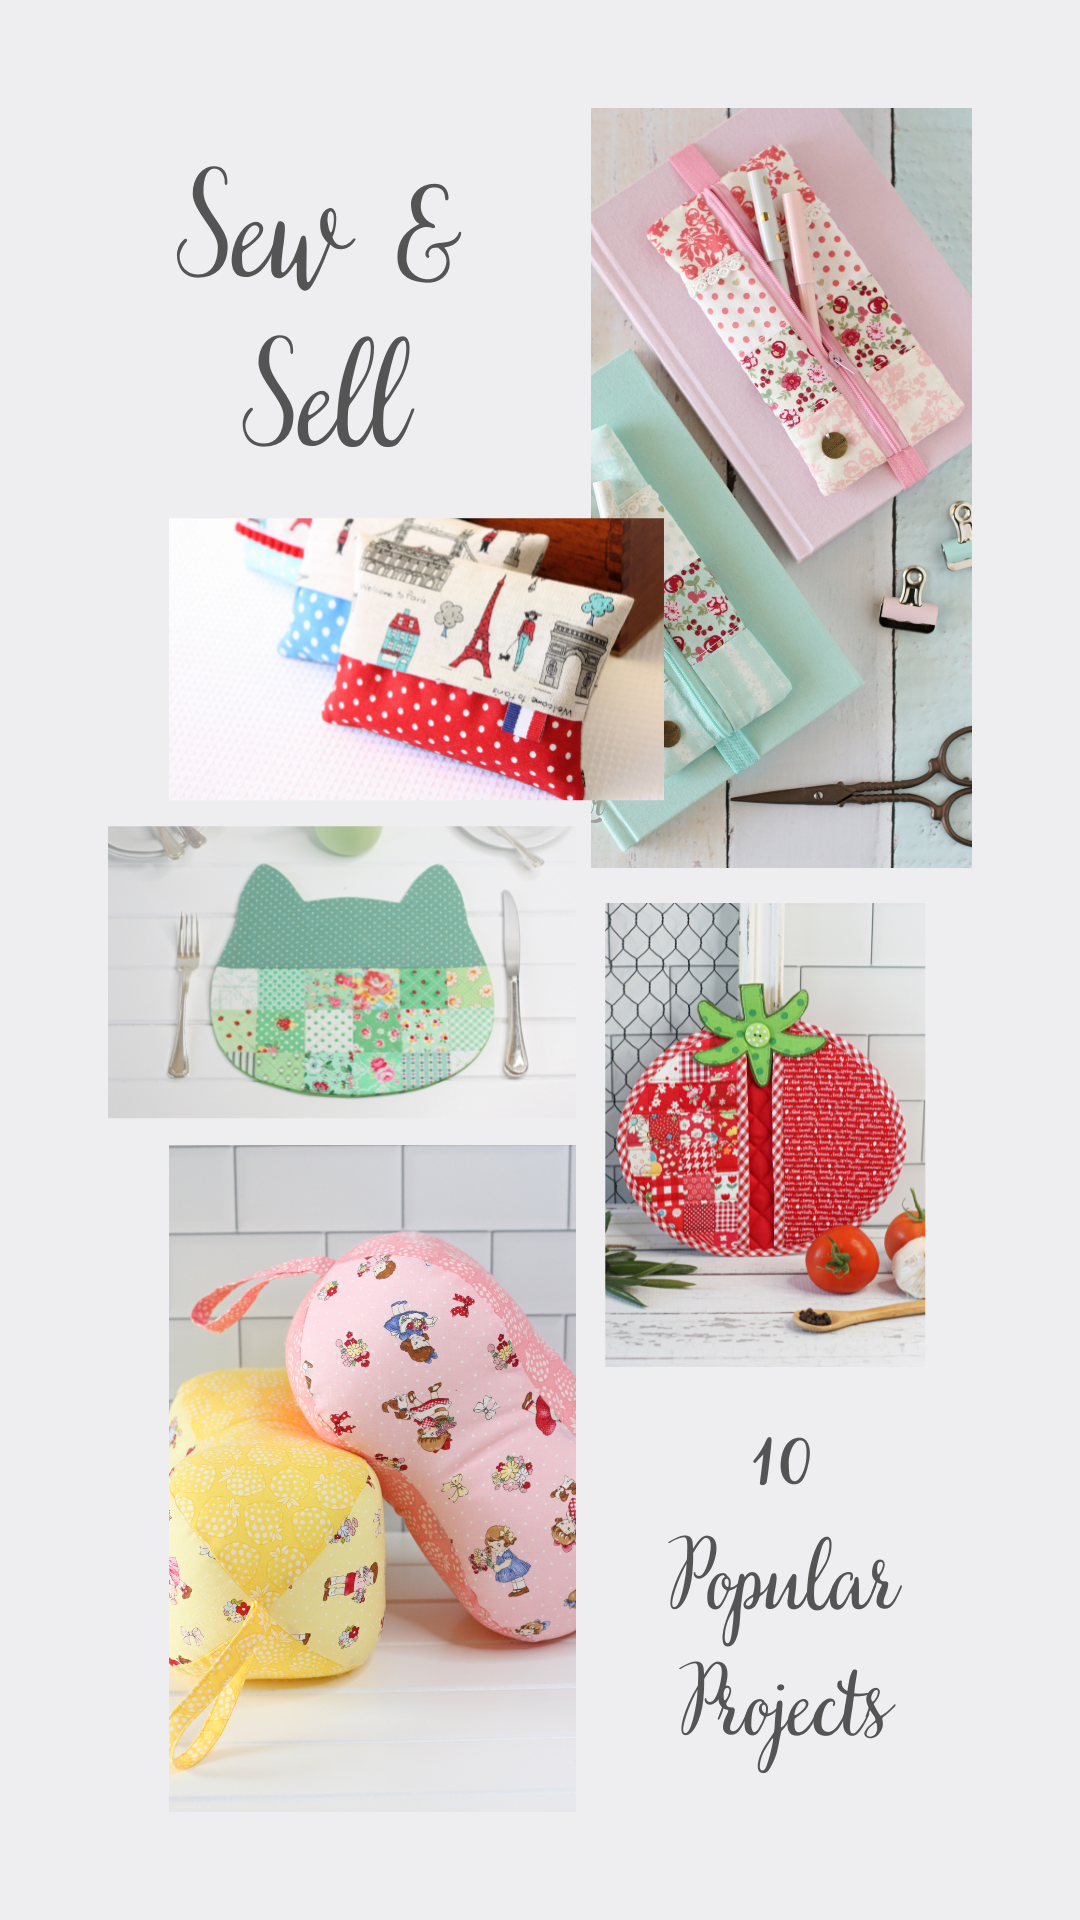 70 Sewing Projects to Make and Sell - Sew My Place